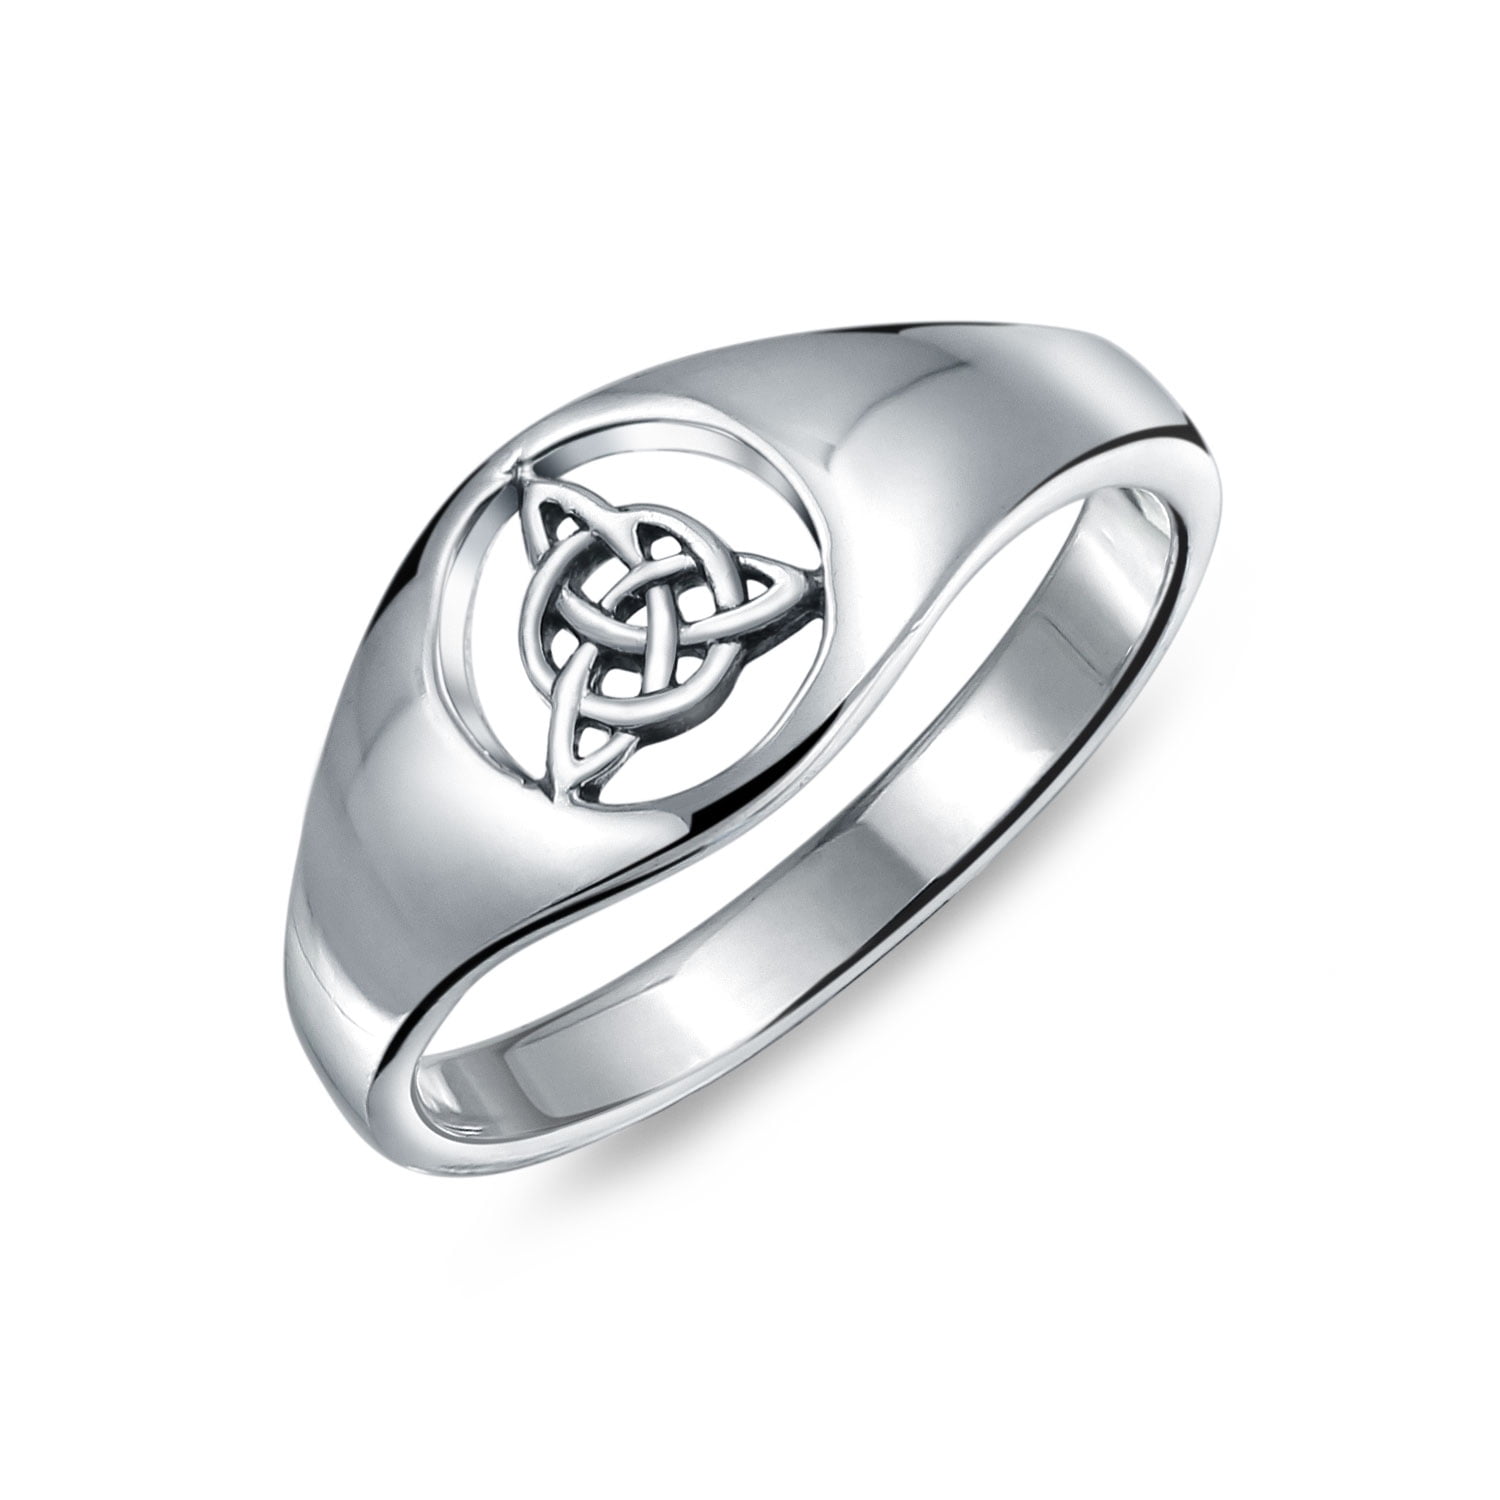 Men's 925 Sterling Silver Trinity Triquetra Celtic Cross Ring 